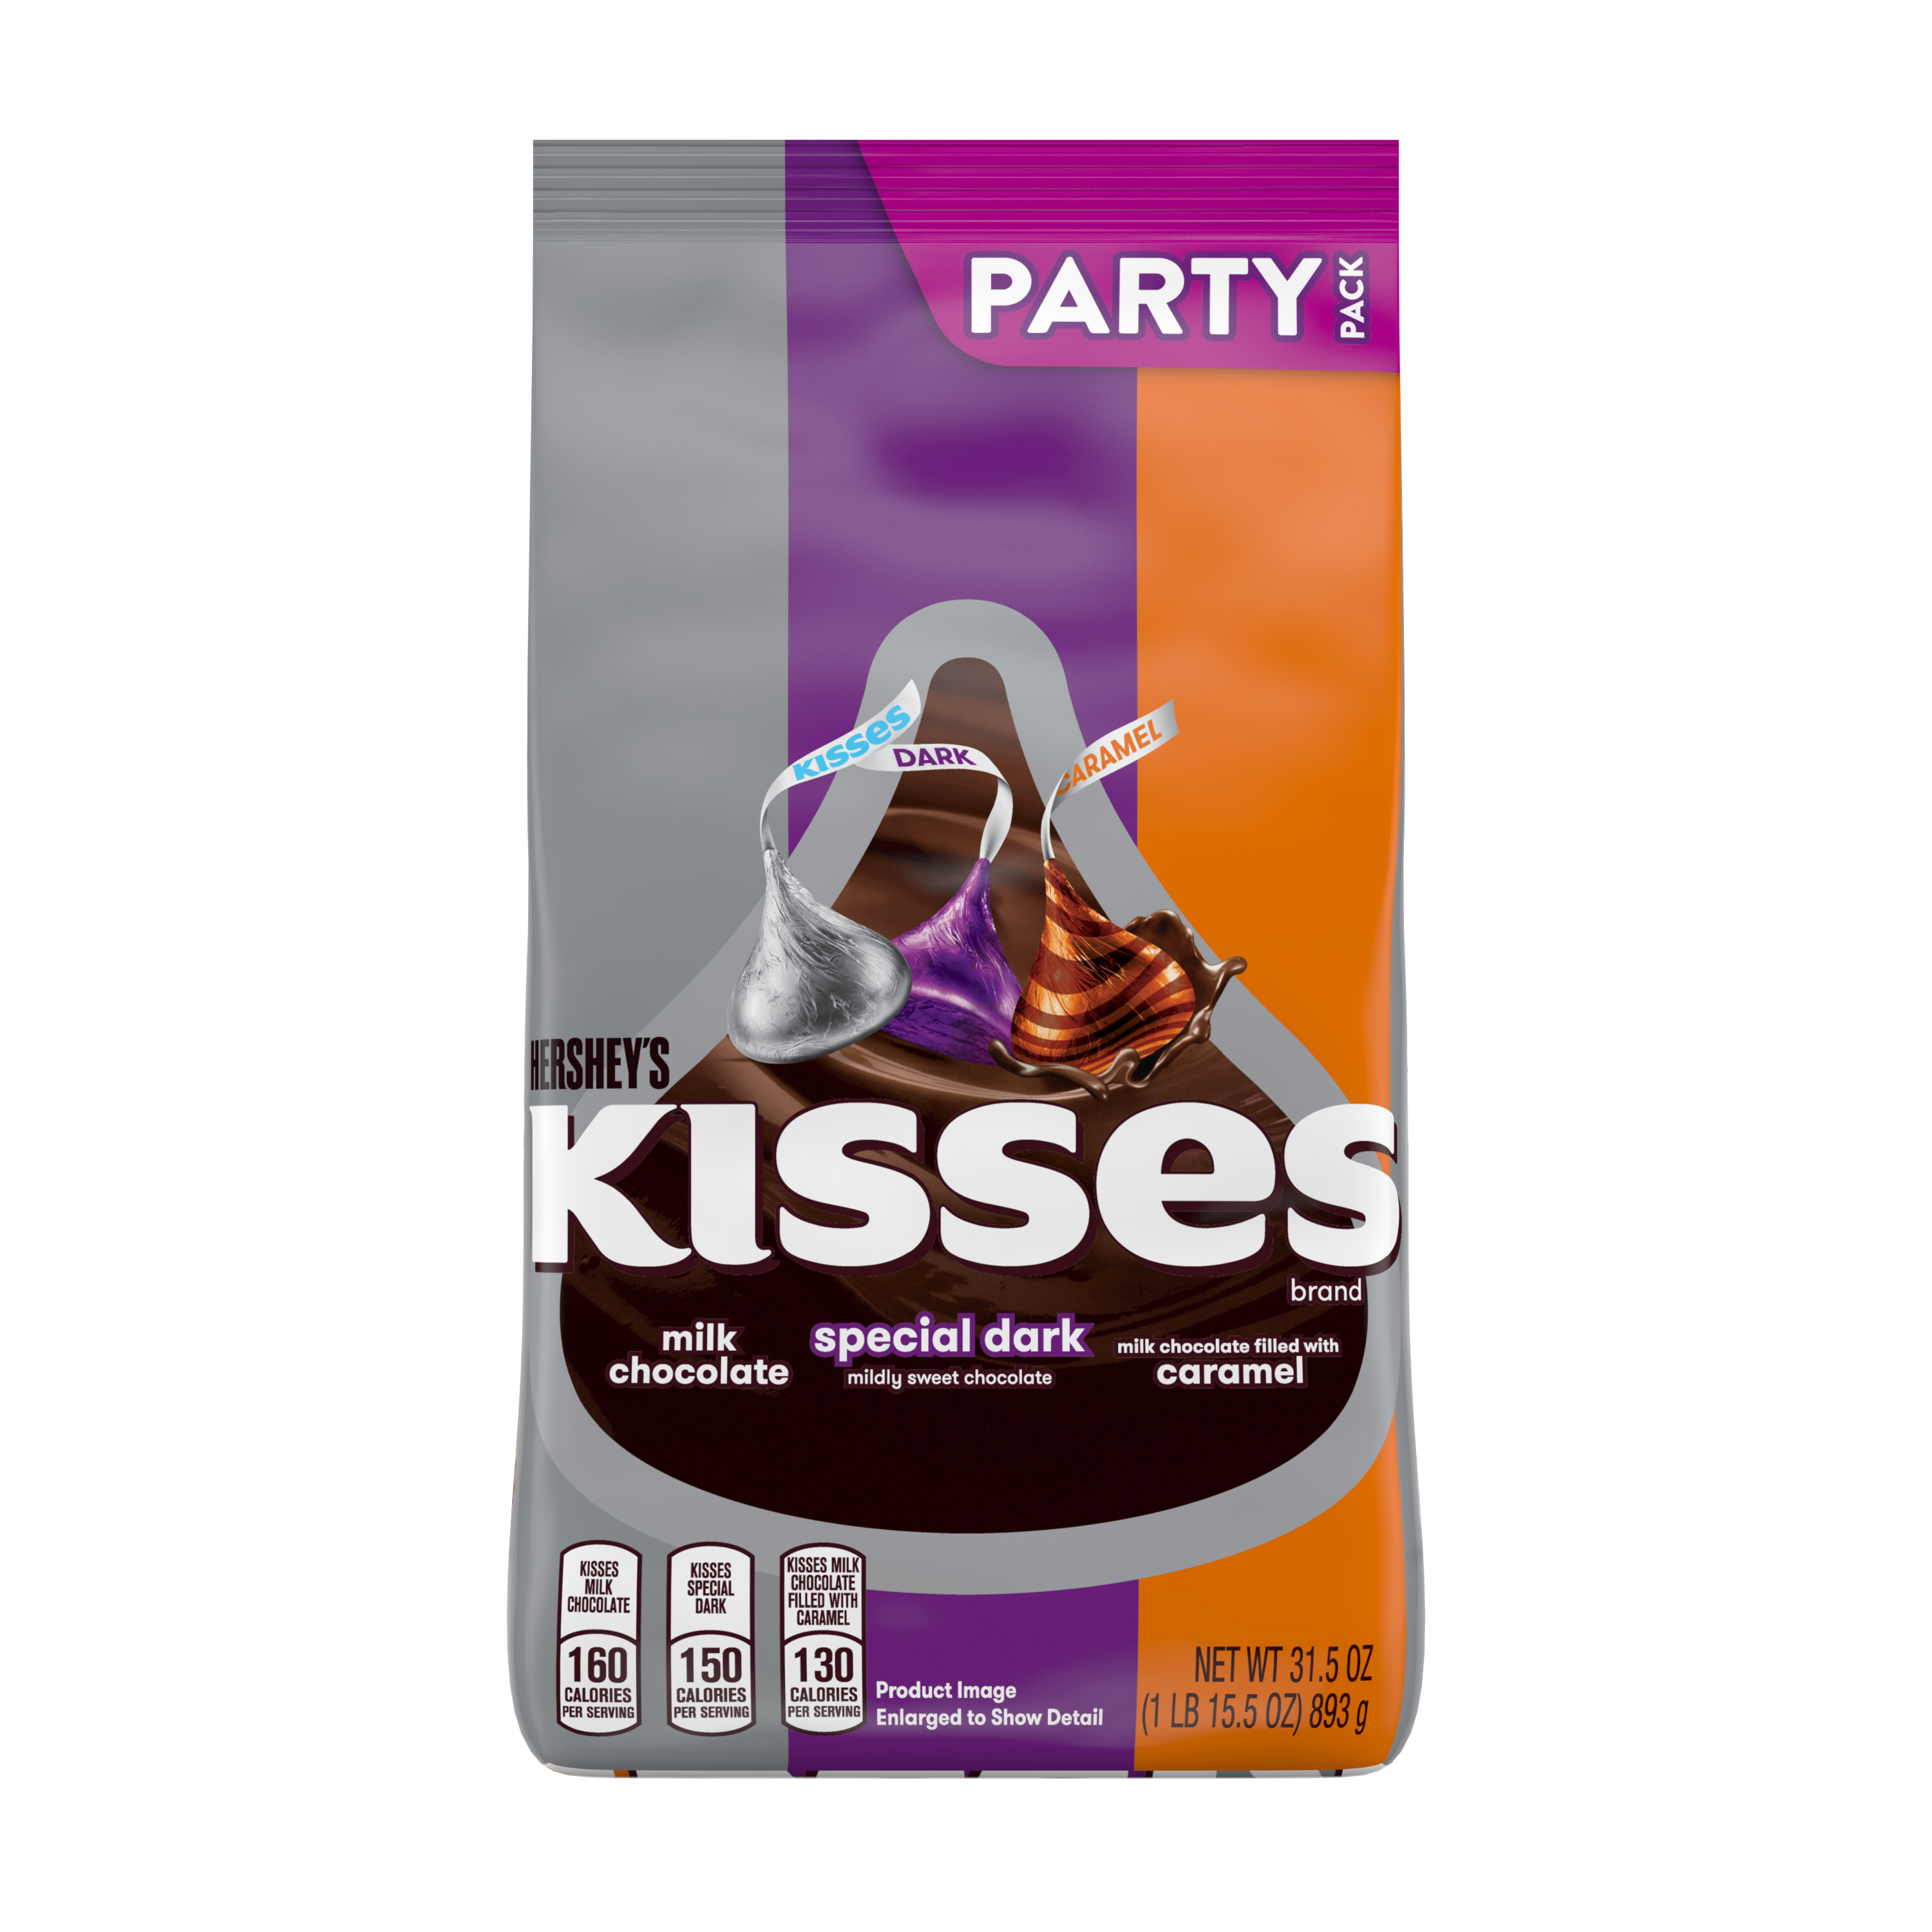 HERSHEY'S KISSES Snack Size Assortment, 31.5 oz pack - Front of Package